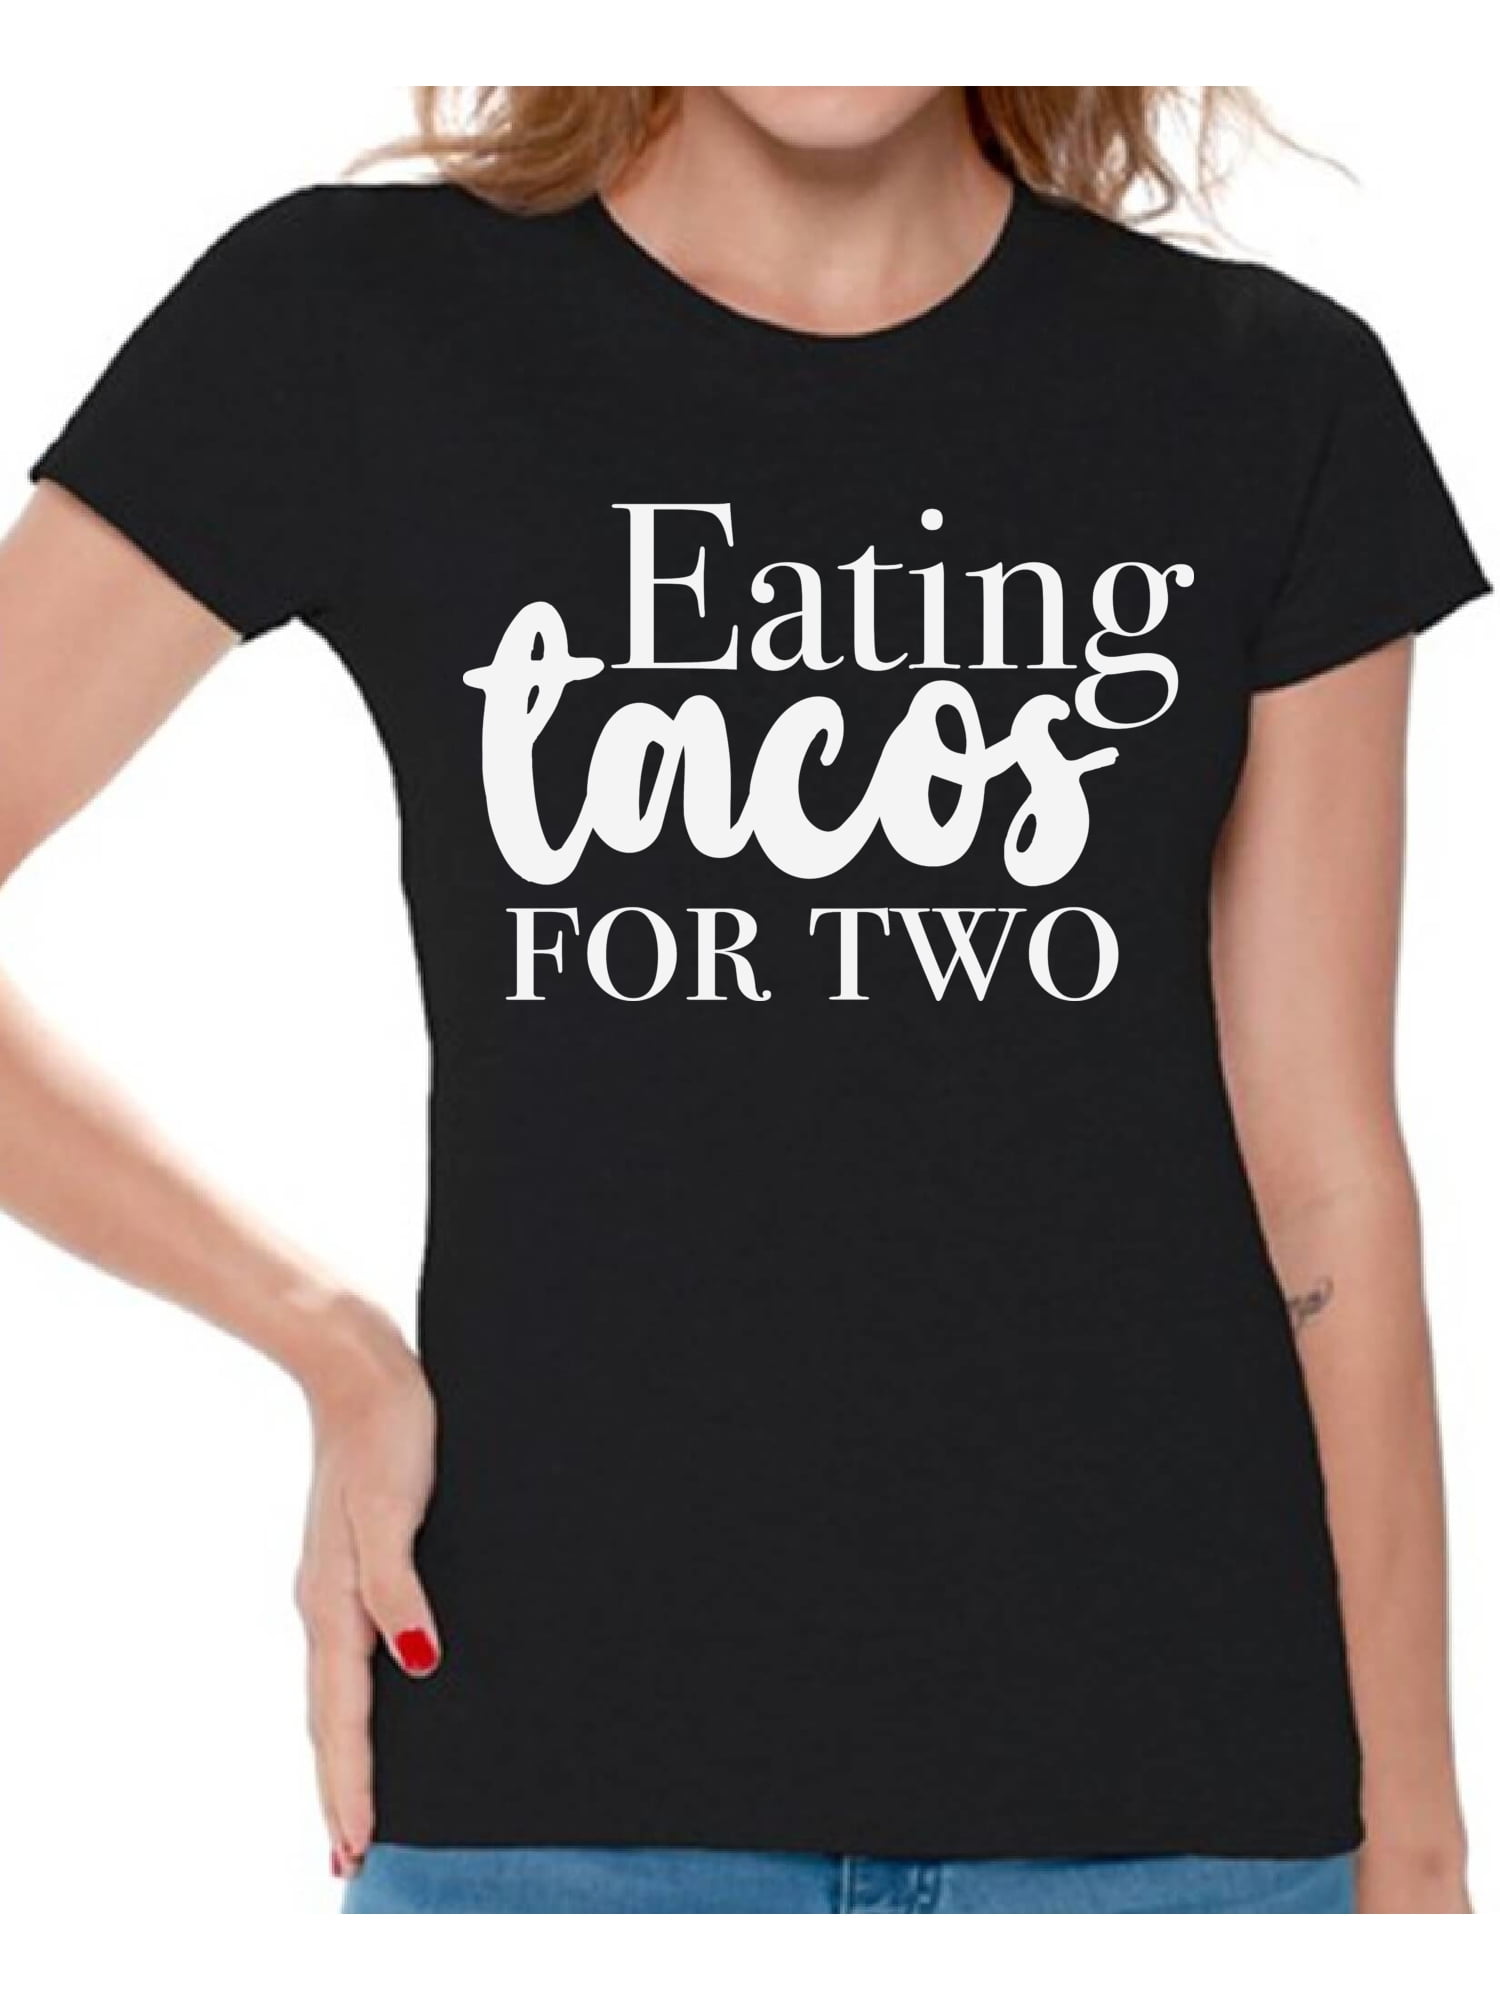 It's Your Day Clothing Eating Tacos for Three Women's Maternity Shirt Twins Pregnancy Announcement Tee 